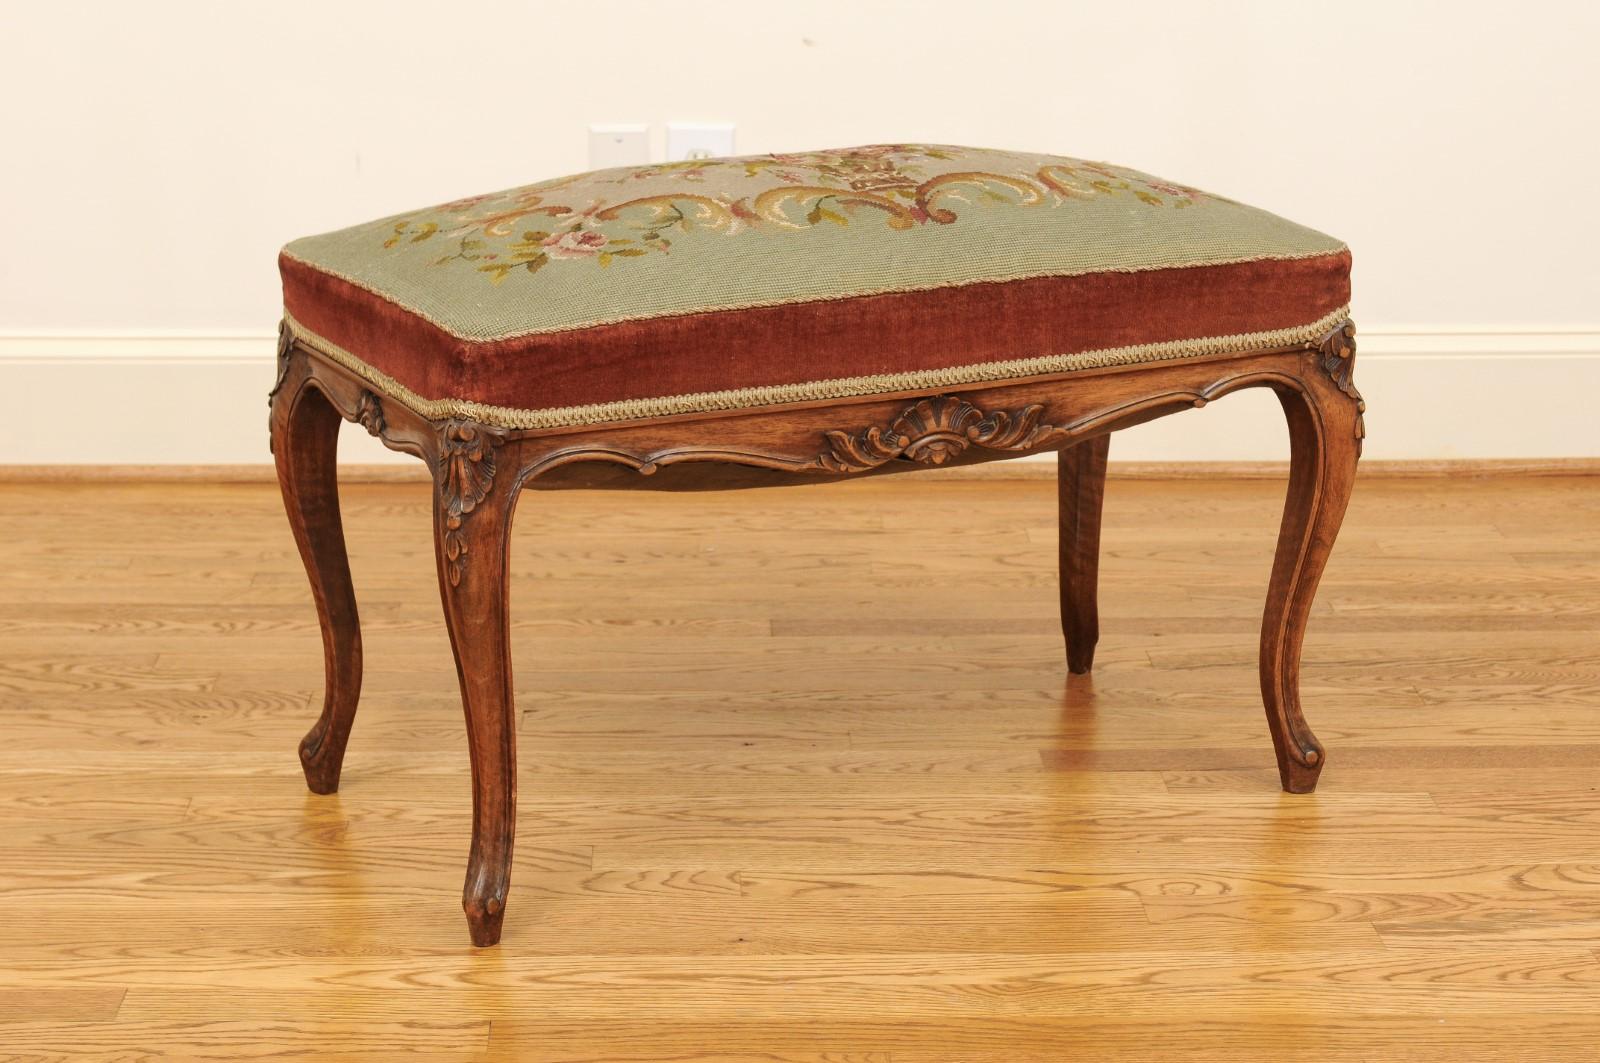 Upholstery French Napoléon III 1860s Walnut Banquette with Original Needlepoint Tapestry